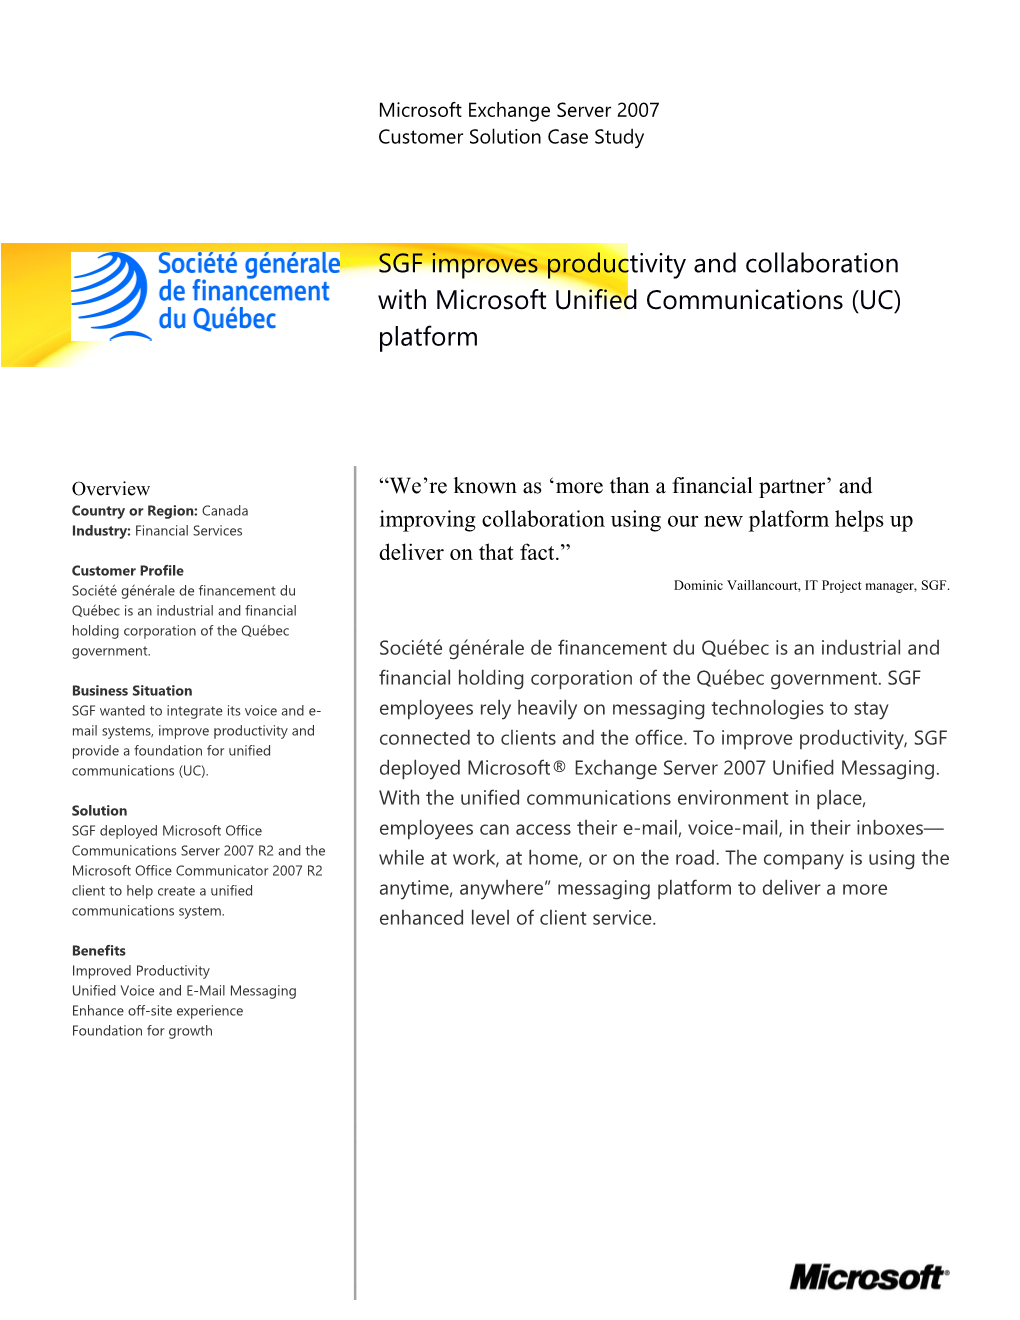 Metia CEP SGF Improves Productivity and Collaboration with Microsoft Unified Communications (U